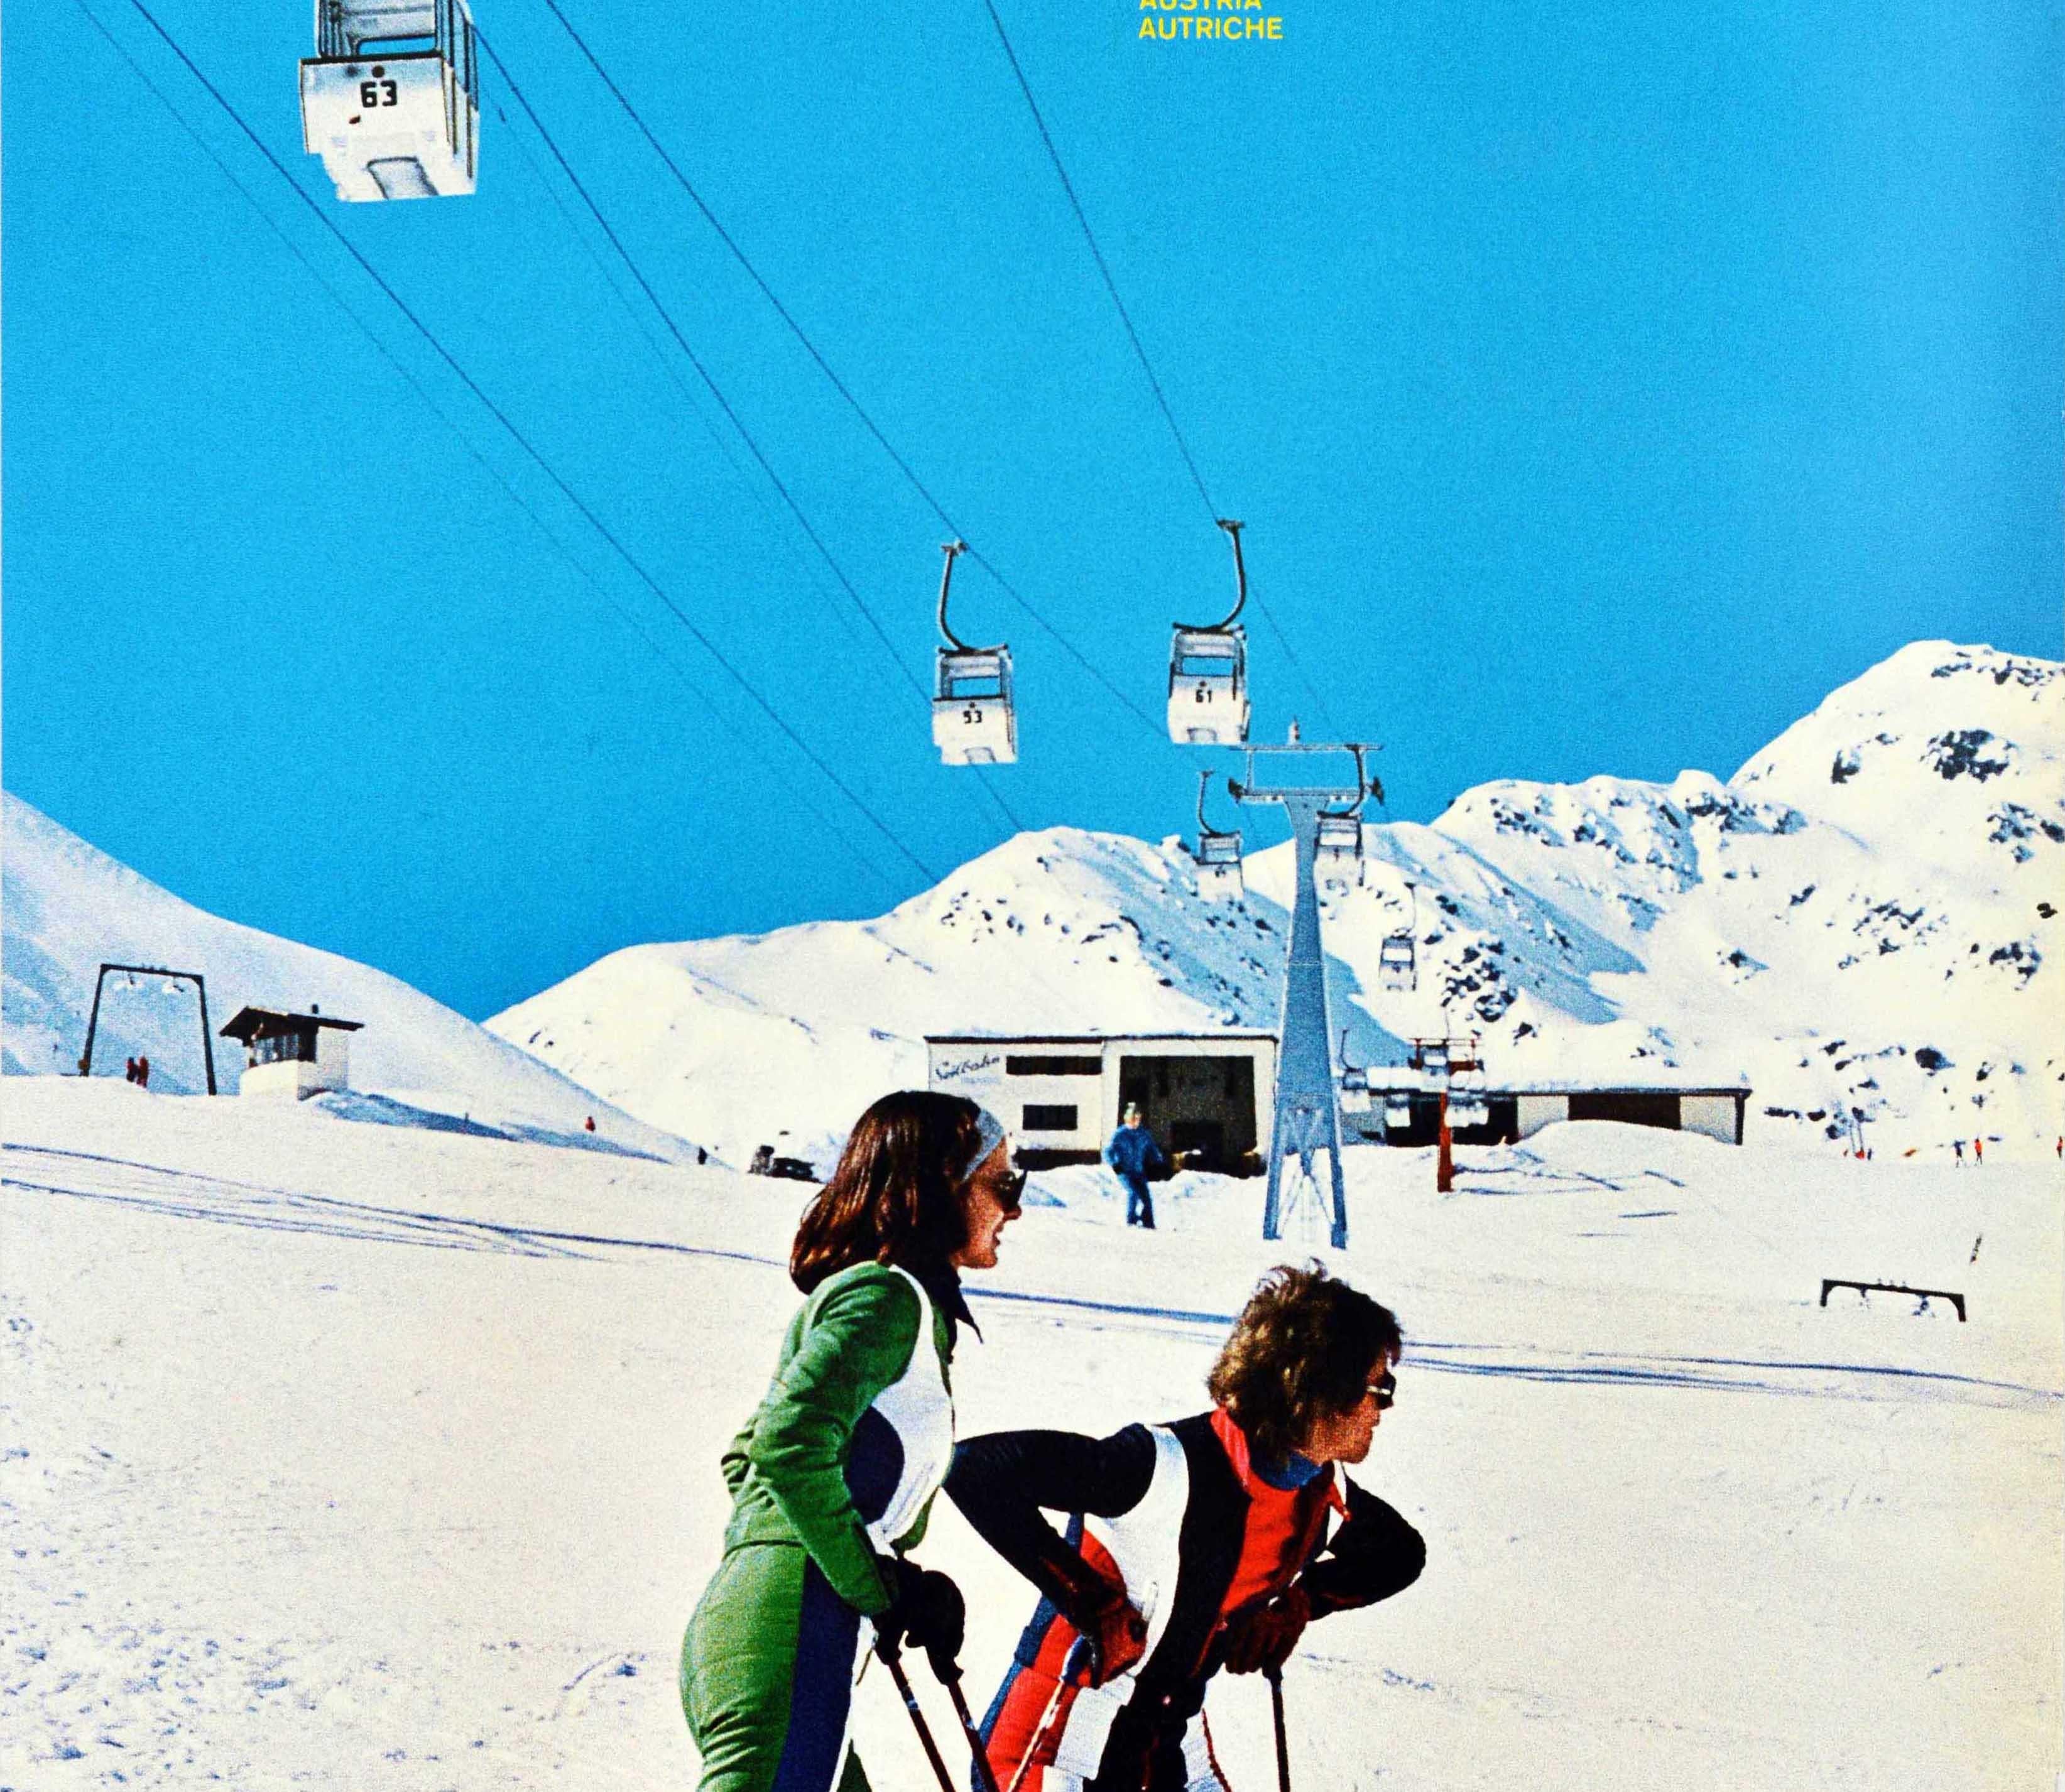 Original vintage winter travel poster for Tirol Osterreich Austria Autriche featuring a photograph of skiers in fashionable ski suits on a piste with a ski lift running above them, the stylised outline title lettering in yellow against the blue sky